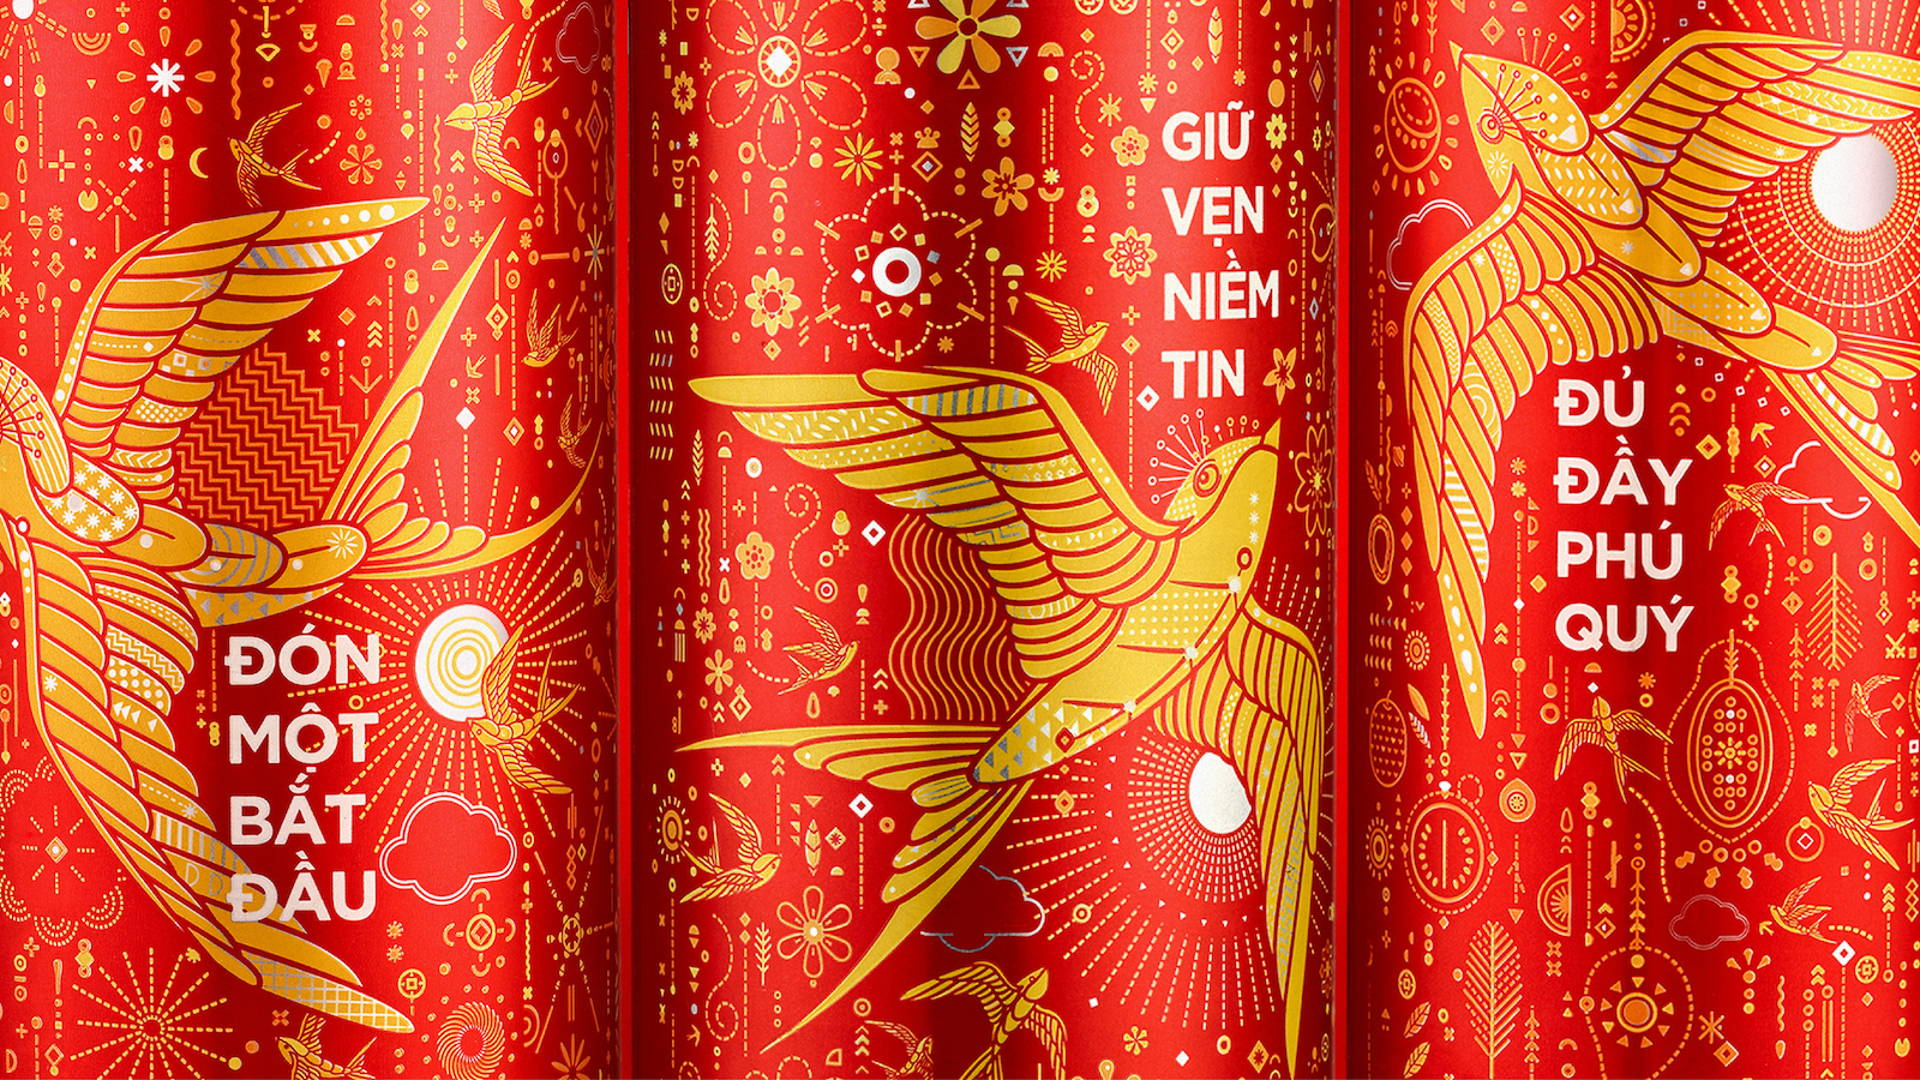 The History of Lunar New Year Meets Iconic Coca-Cola | Dieline - Design,  Branding & Packaging Inspiration